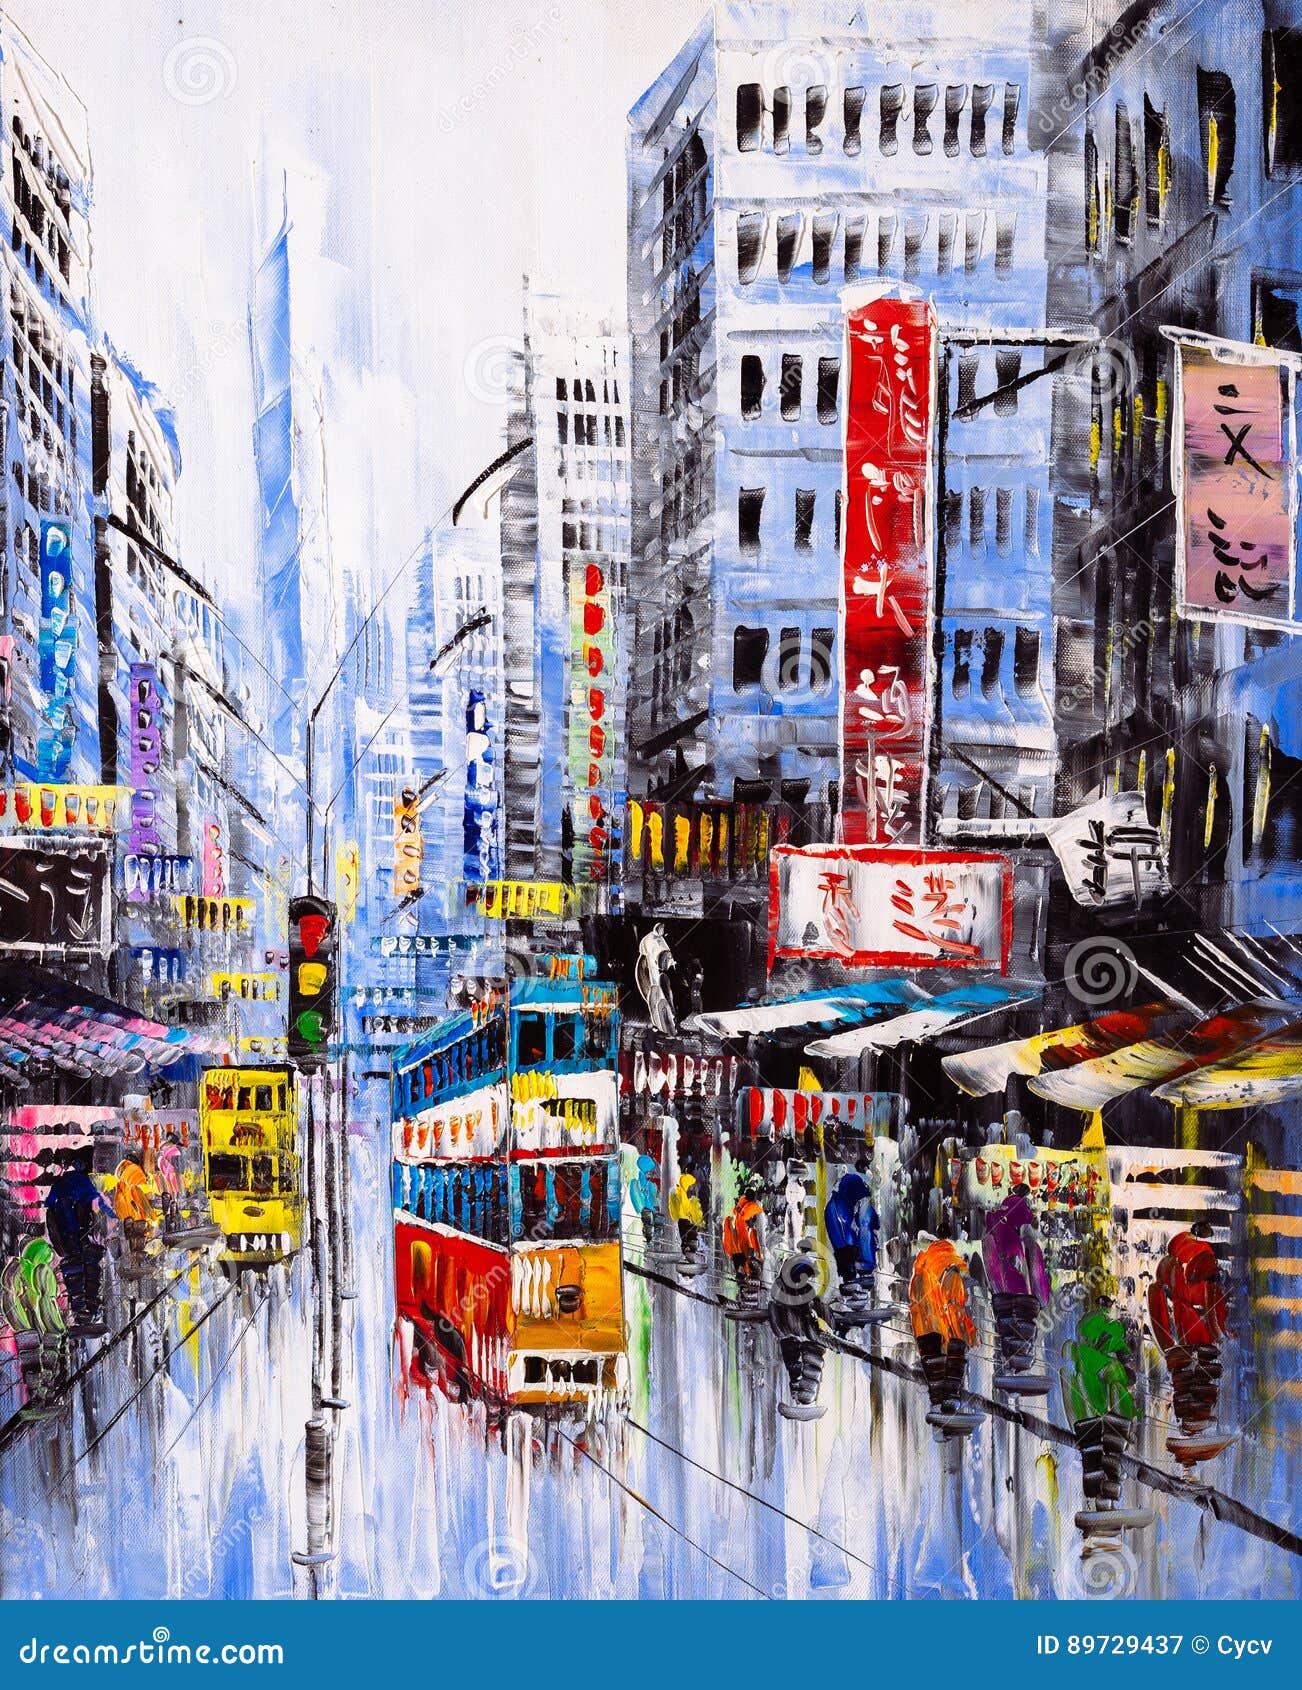 Oil Painting - Street View Of Hong Kong Stock Image ...